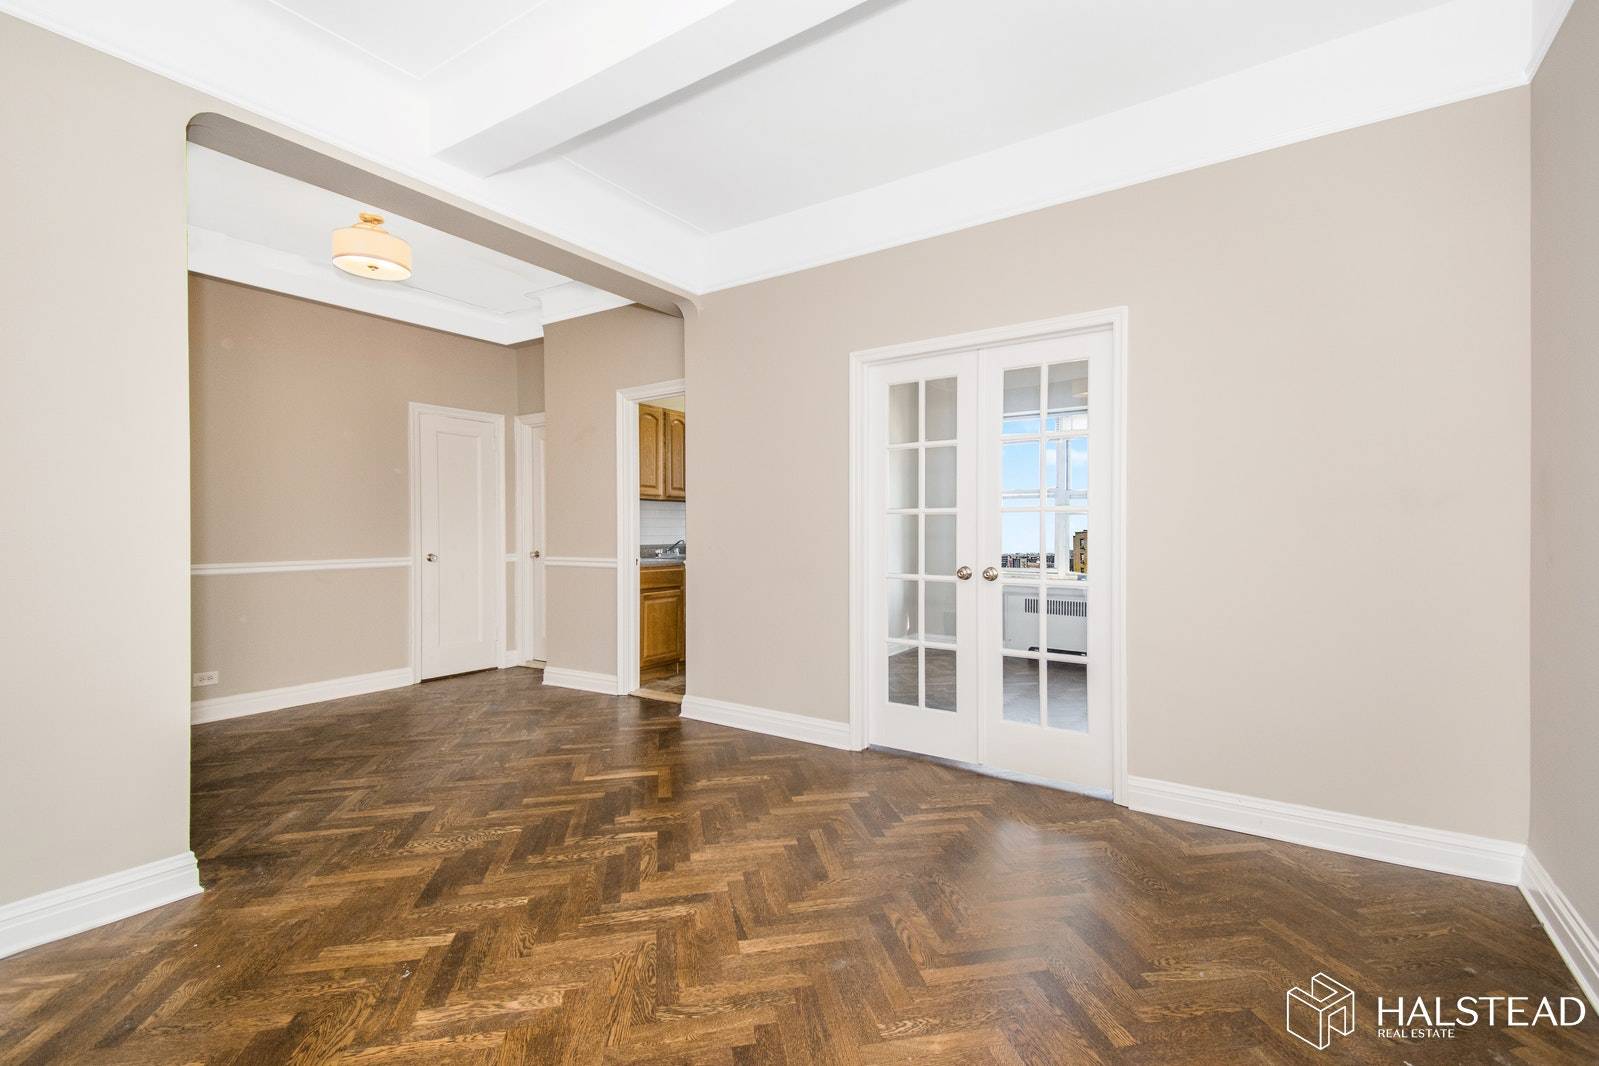 Located in the hearth of Hudson Heights, this top floor, convertible one bedroom condominium has unobstructed northern exposures.